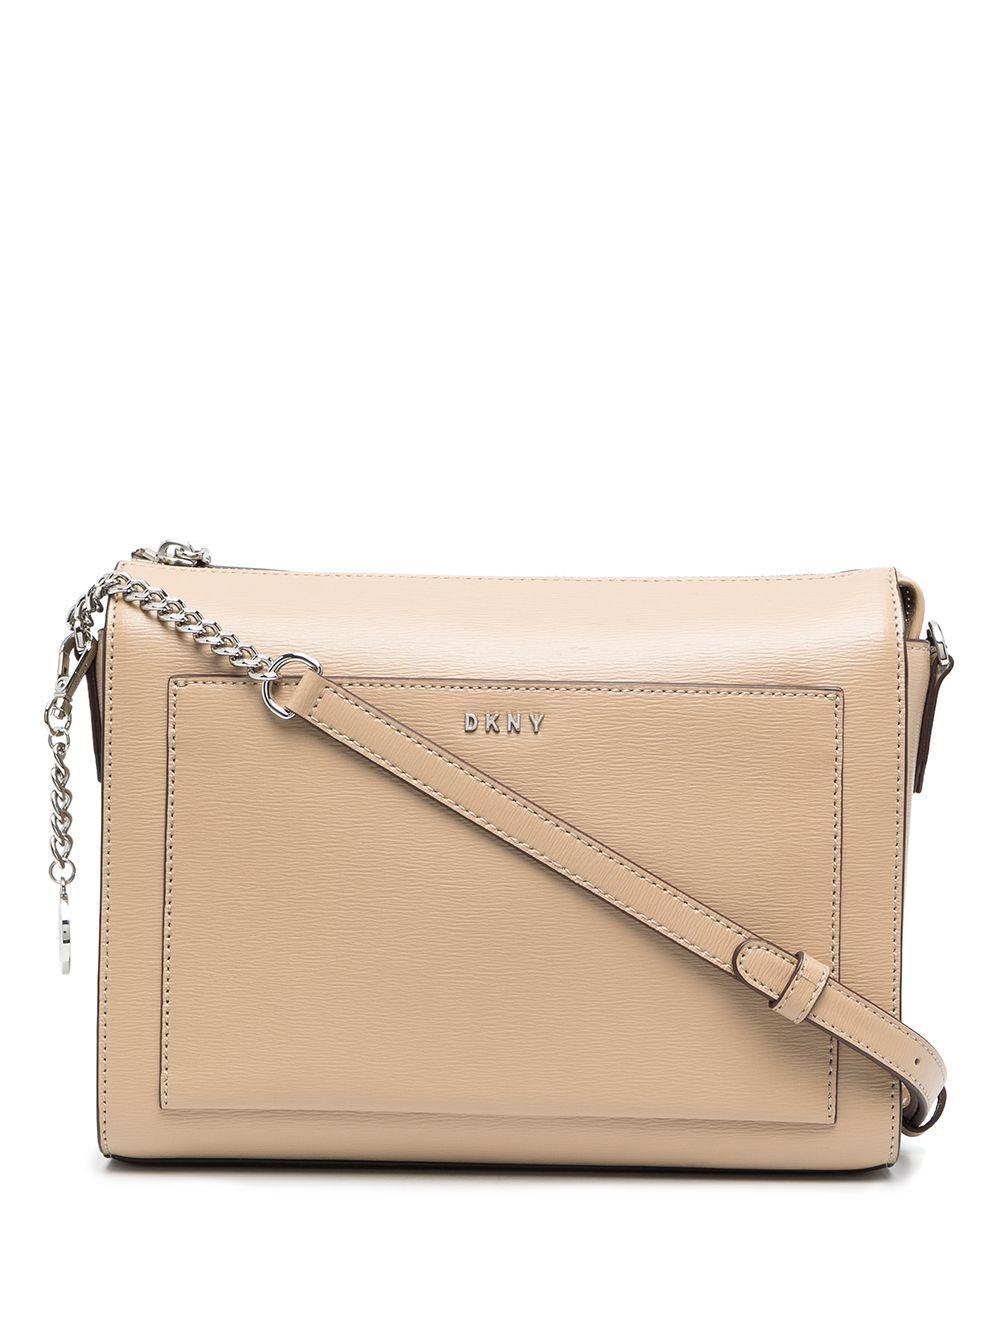 DKNY Leather Bryant Textured Crossbody Bag in Beige (Natural) - Lyst